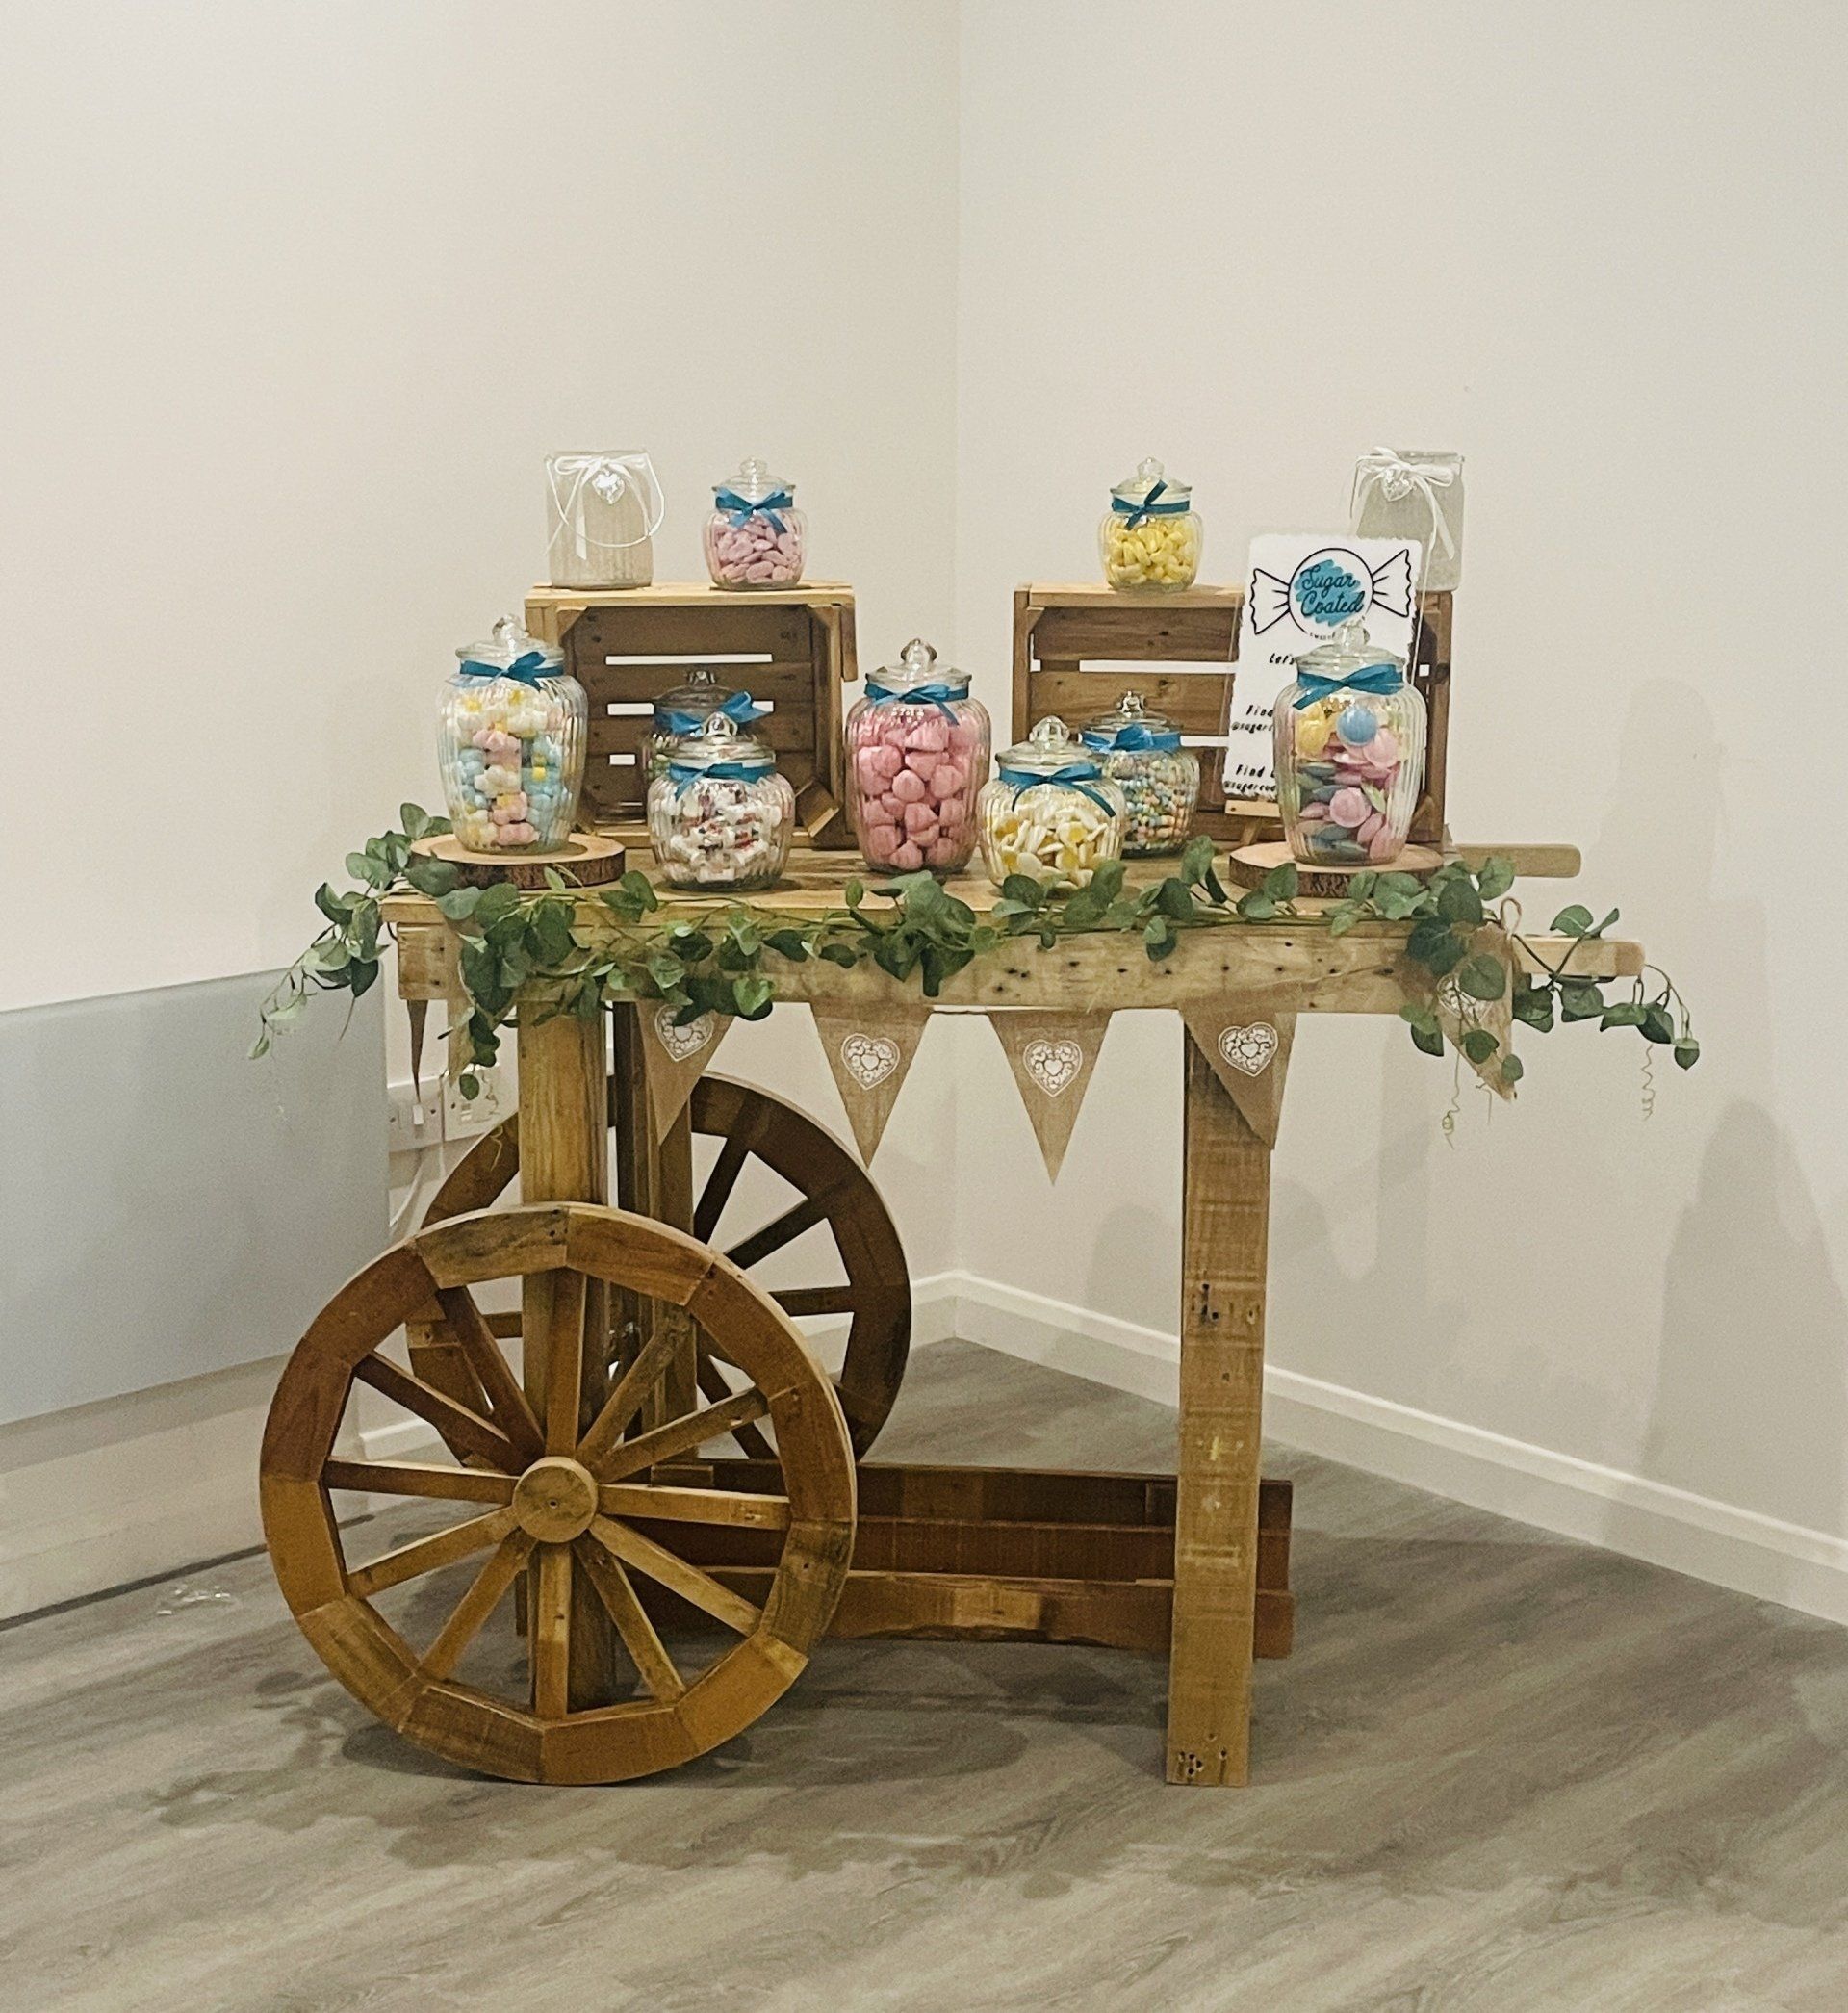 image of a sweet cart